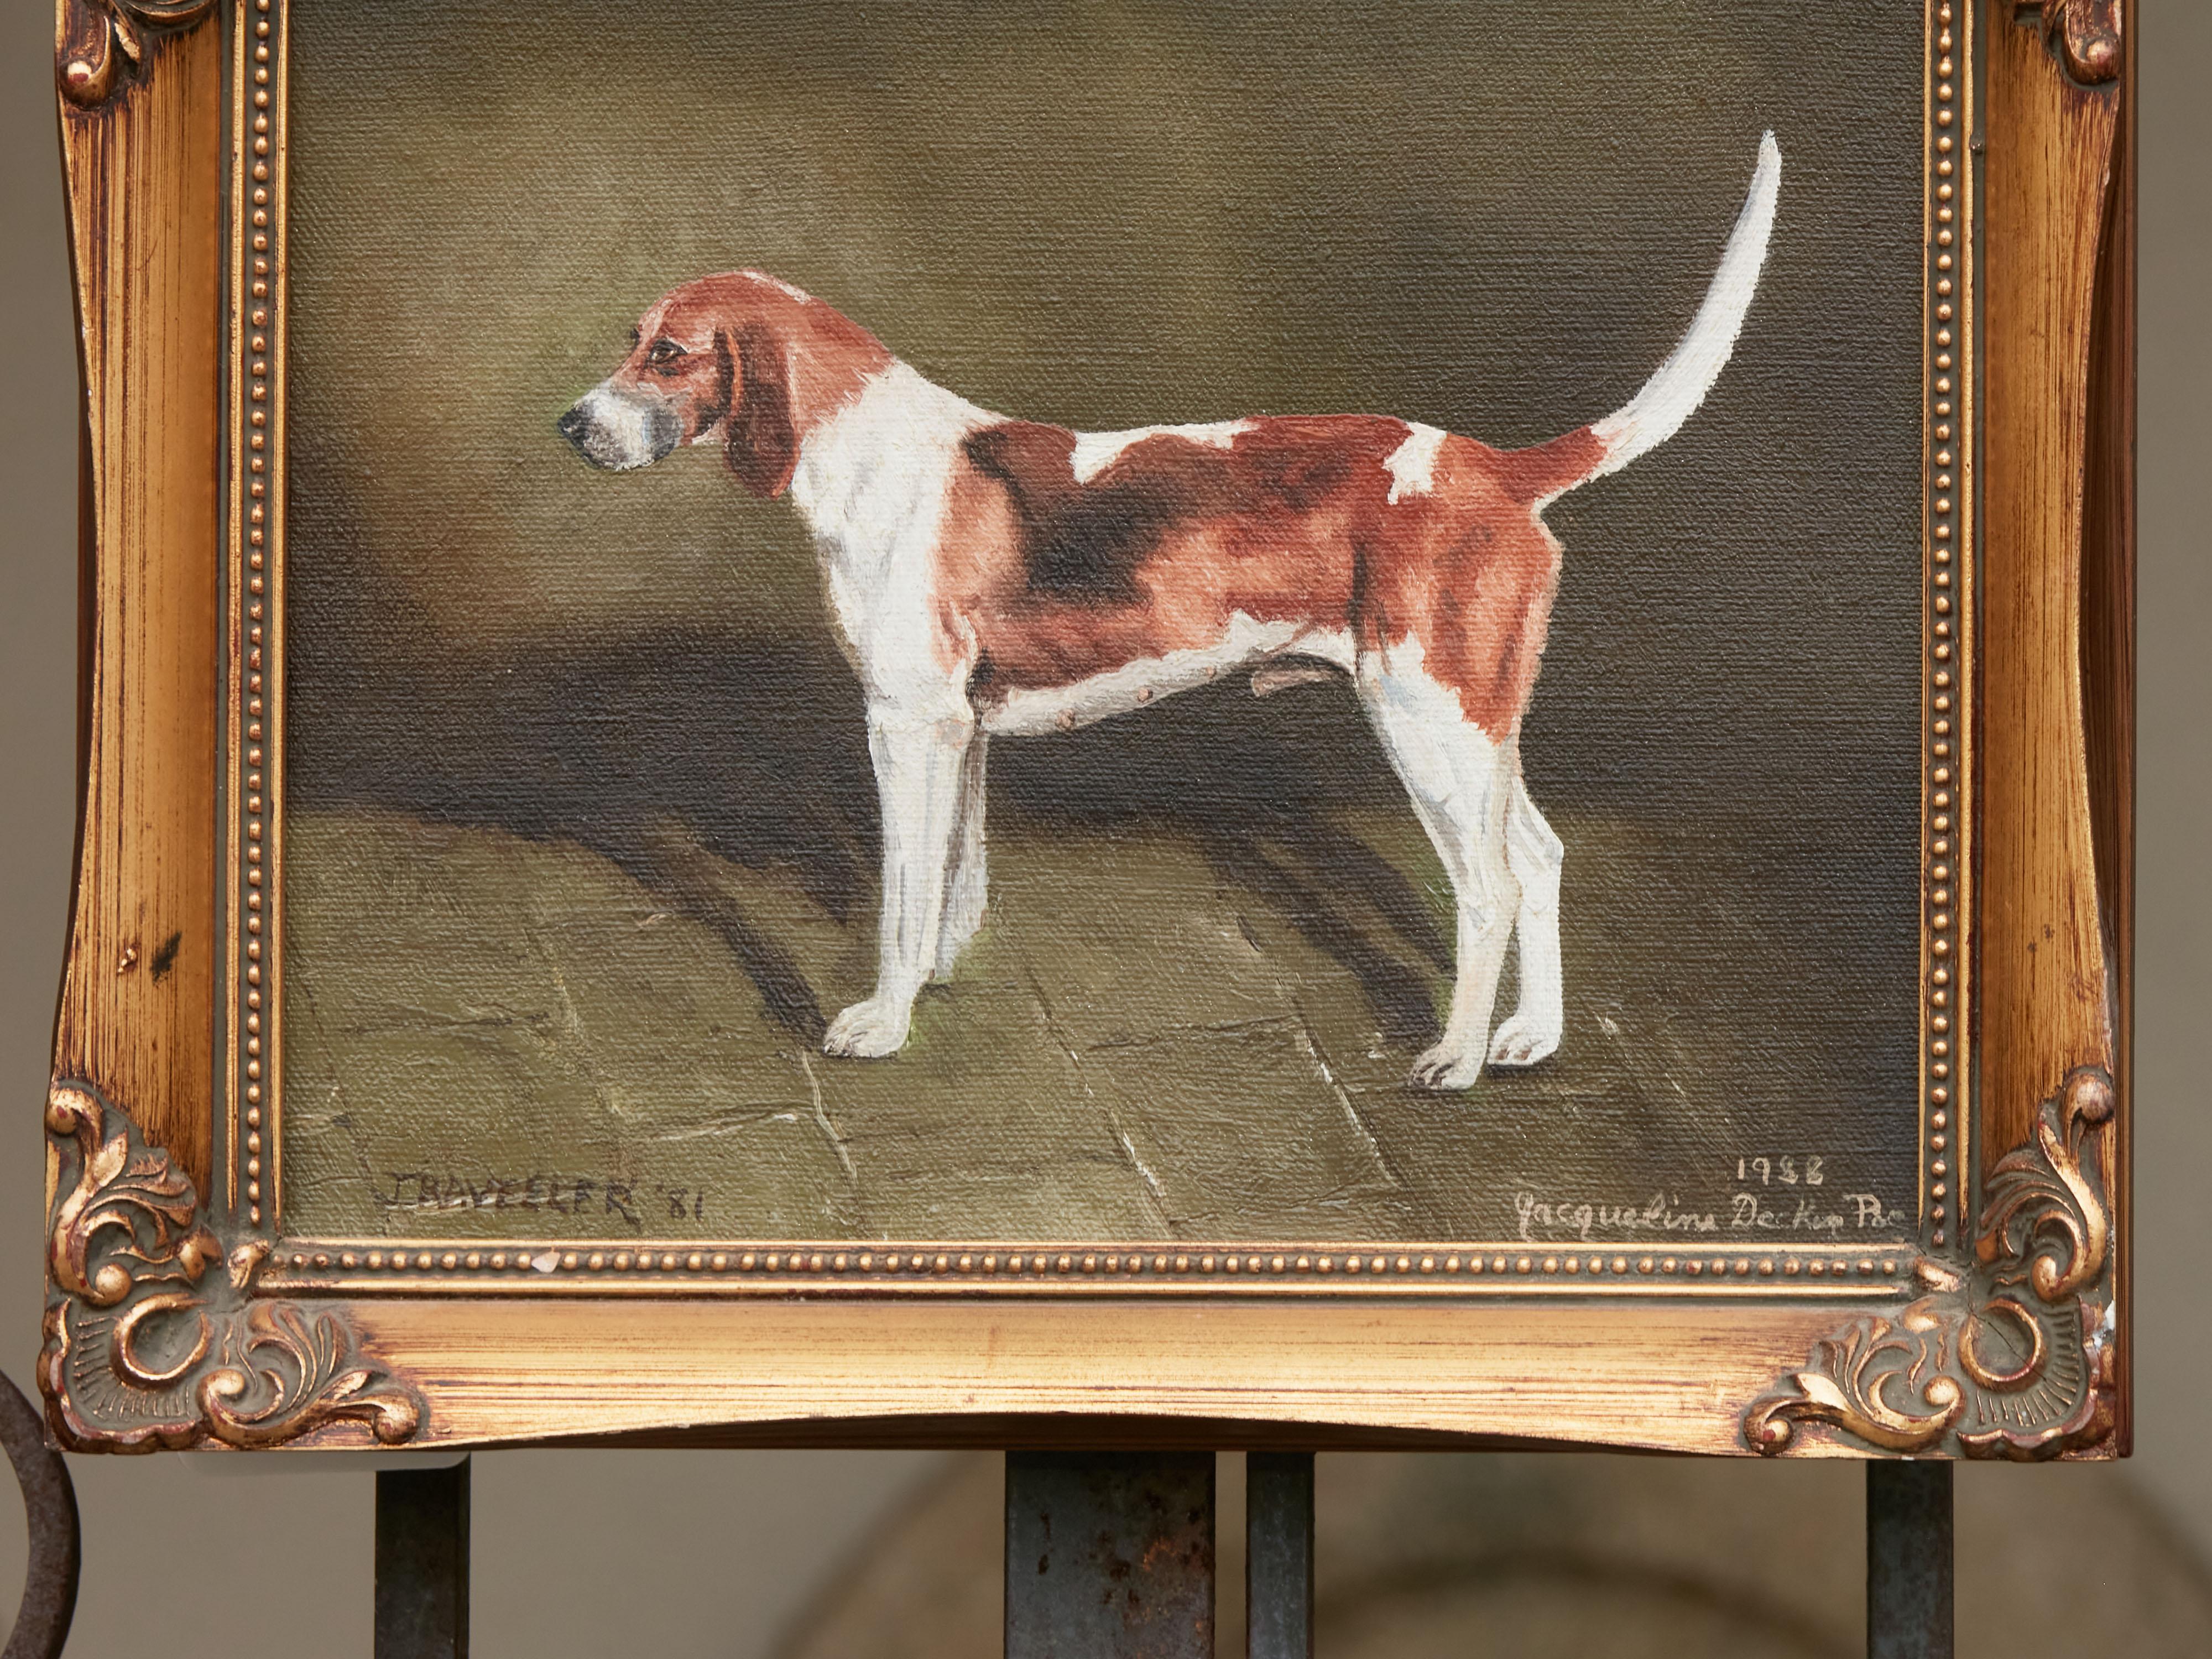 Oil on Canvas Dog Painting Depicting a Belvoir Hound, Signed Jacqueline Decker 3